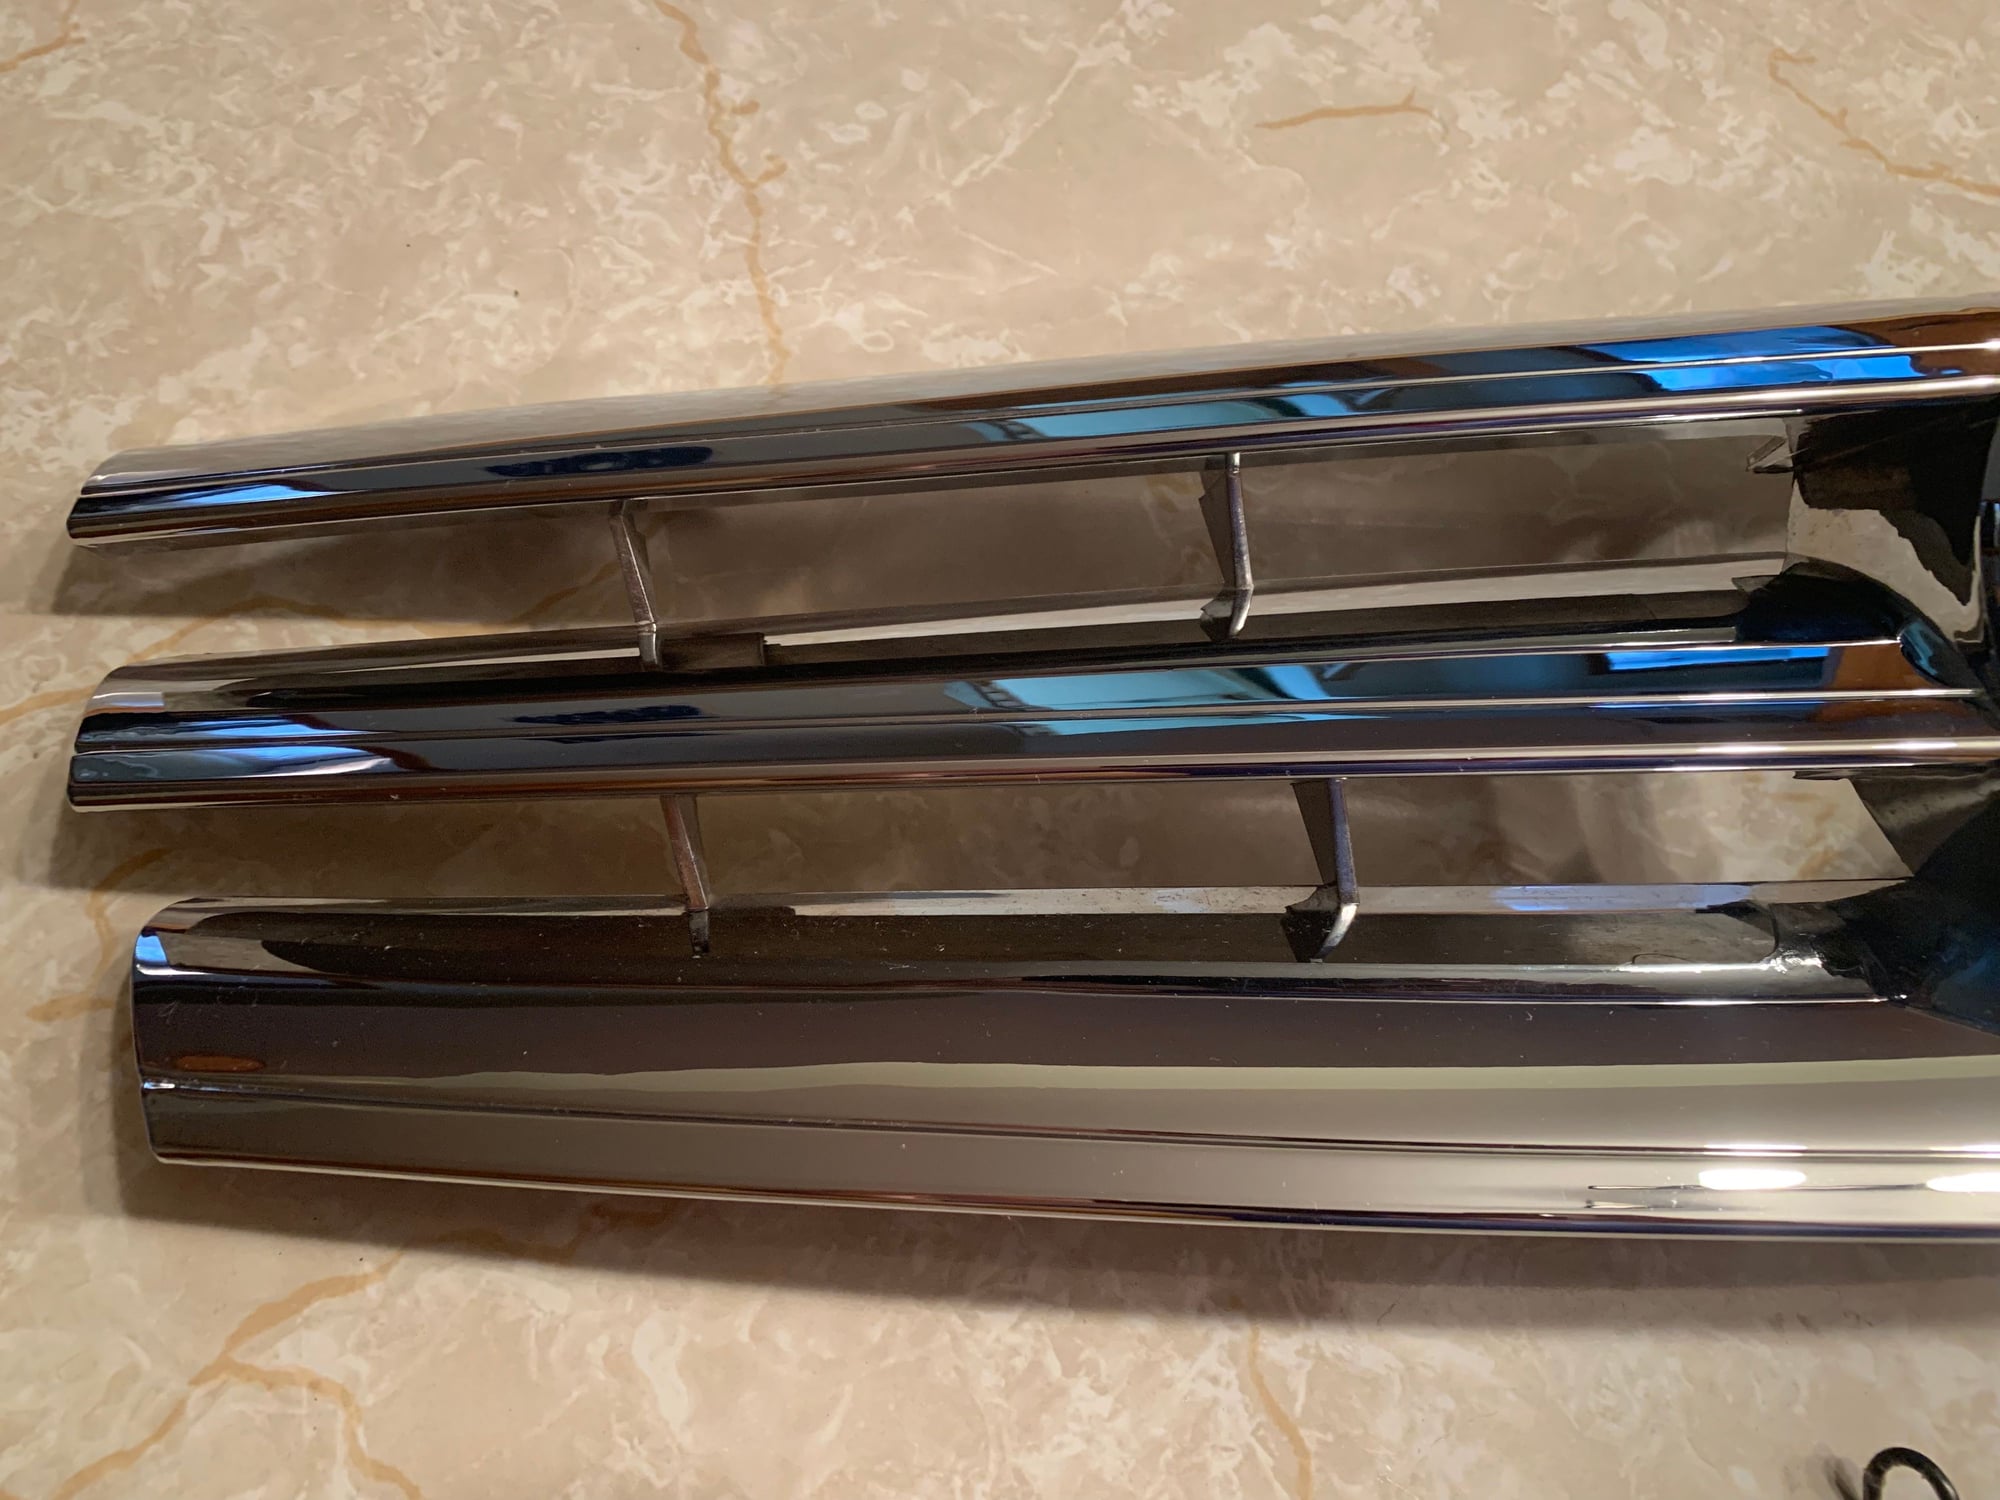 Exterior Body Parts - 1990-2002 Chrome CL-Style Grill for Mercedes SL-Class R129 SL320 SL500 - Used - 1990 to 2002 Mercedes-Benz 500SL - Hickory Hills, IL 60457, United States